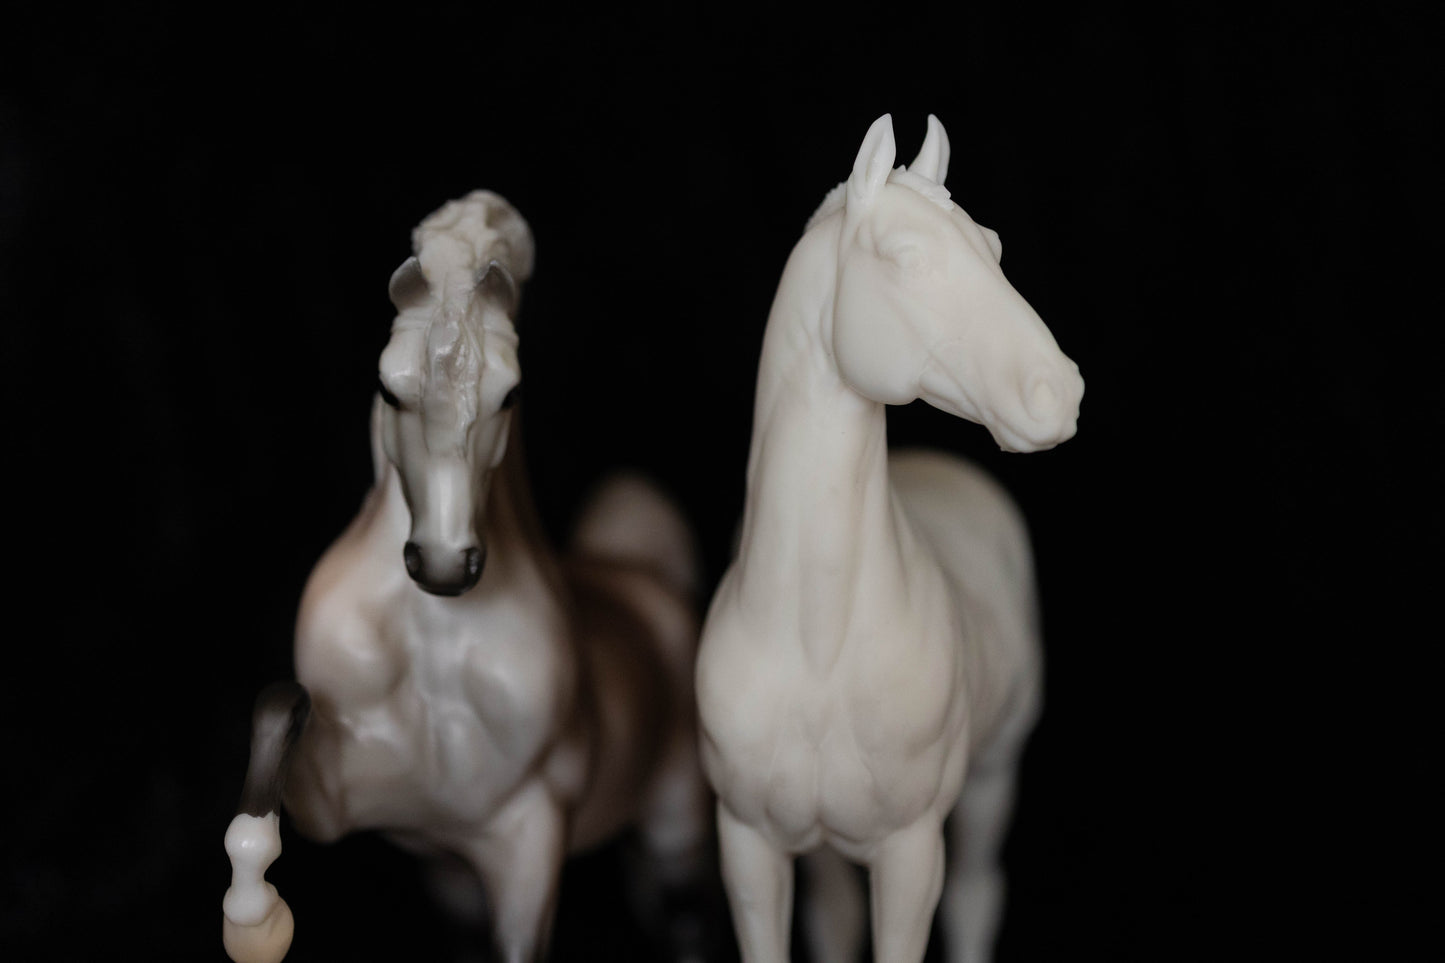 *mirrored version* Traditional scale Grade horse / Cob - White resin ready to paint - Pre - Order - LTD TO 10 COPIES